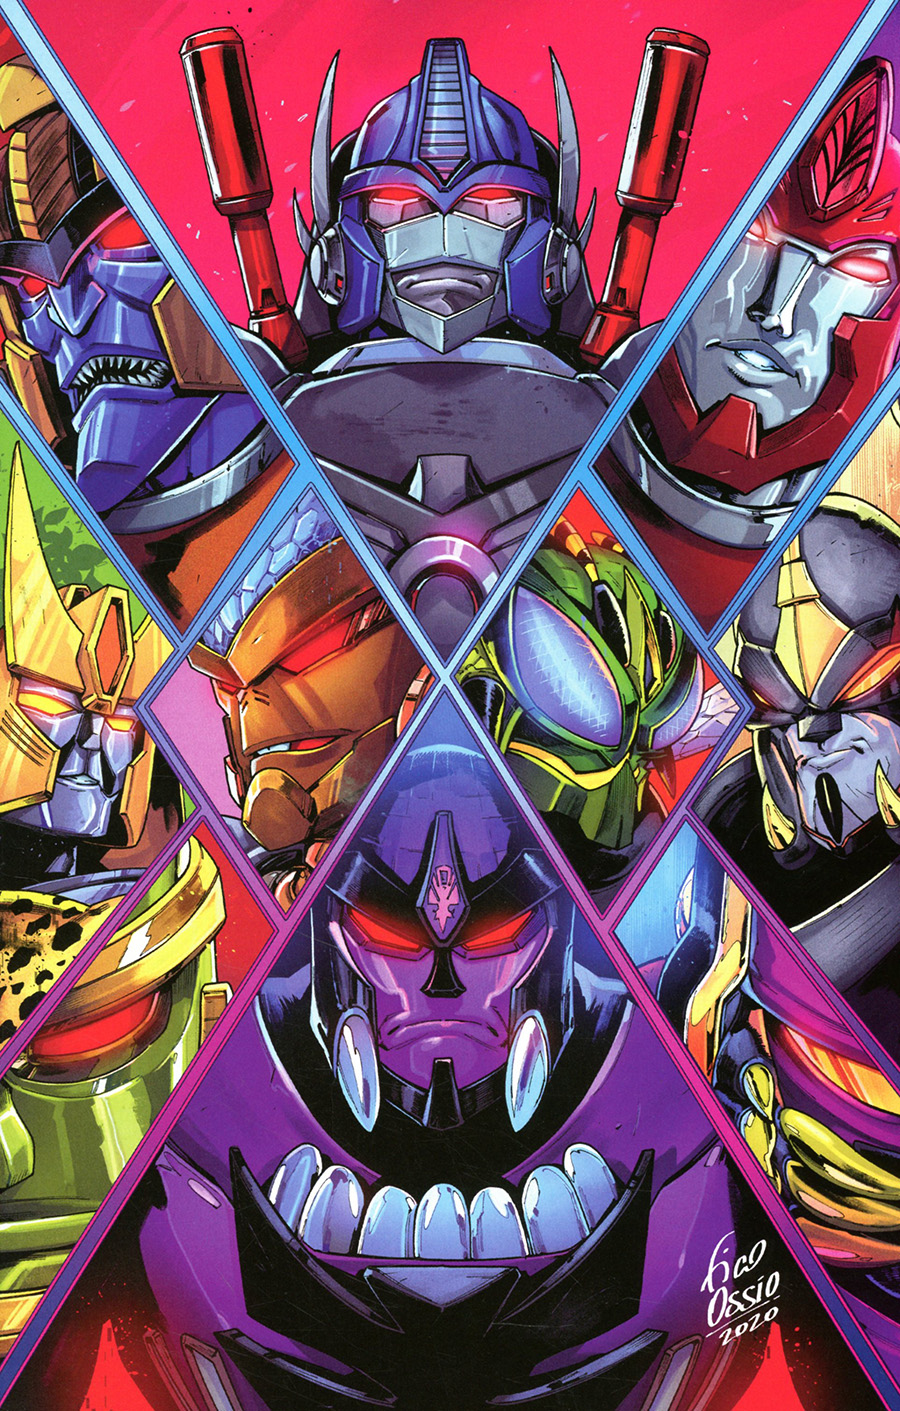 Transformers Beast Wars Vol 2 #1 Cover C Incentive Fico Ossio Variant Cover